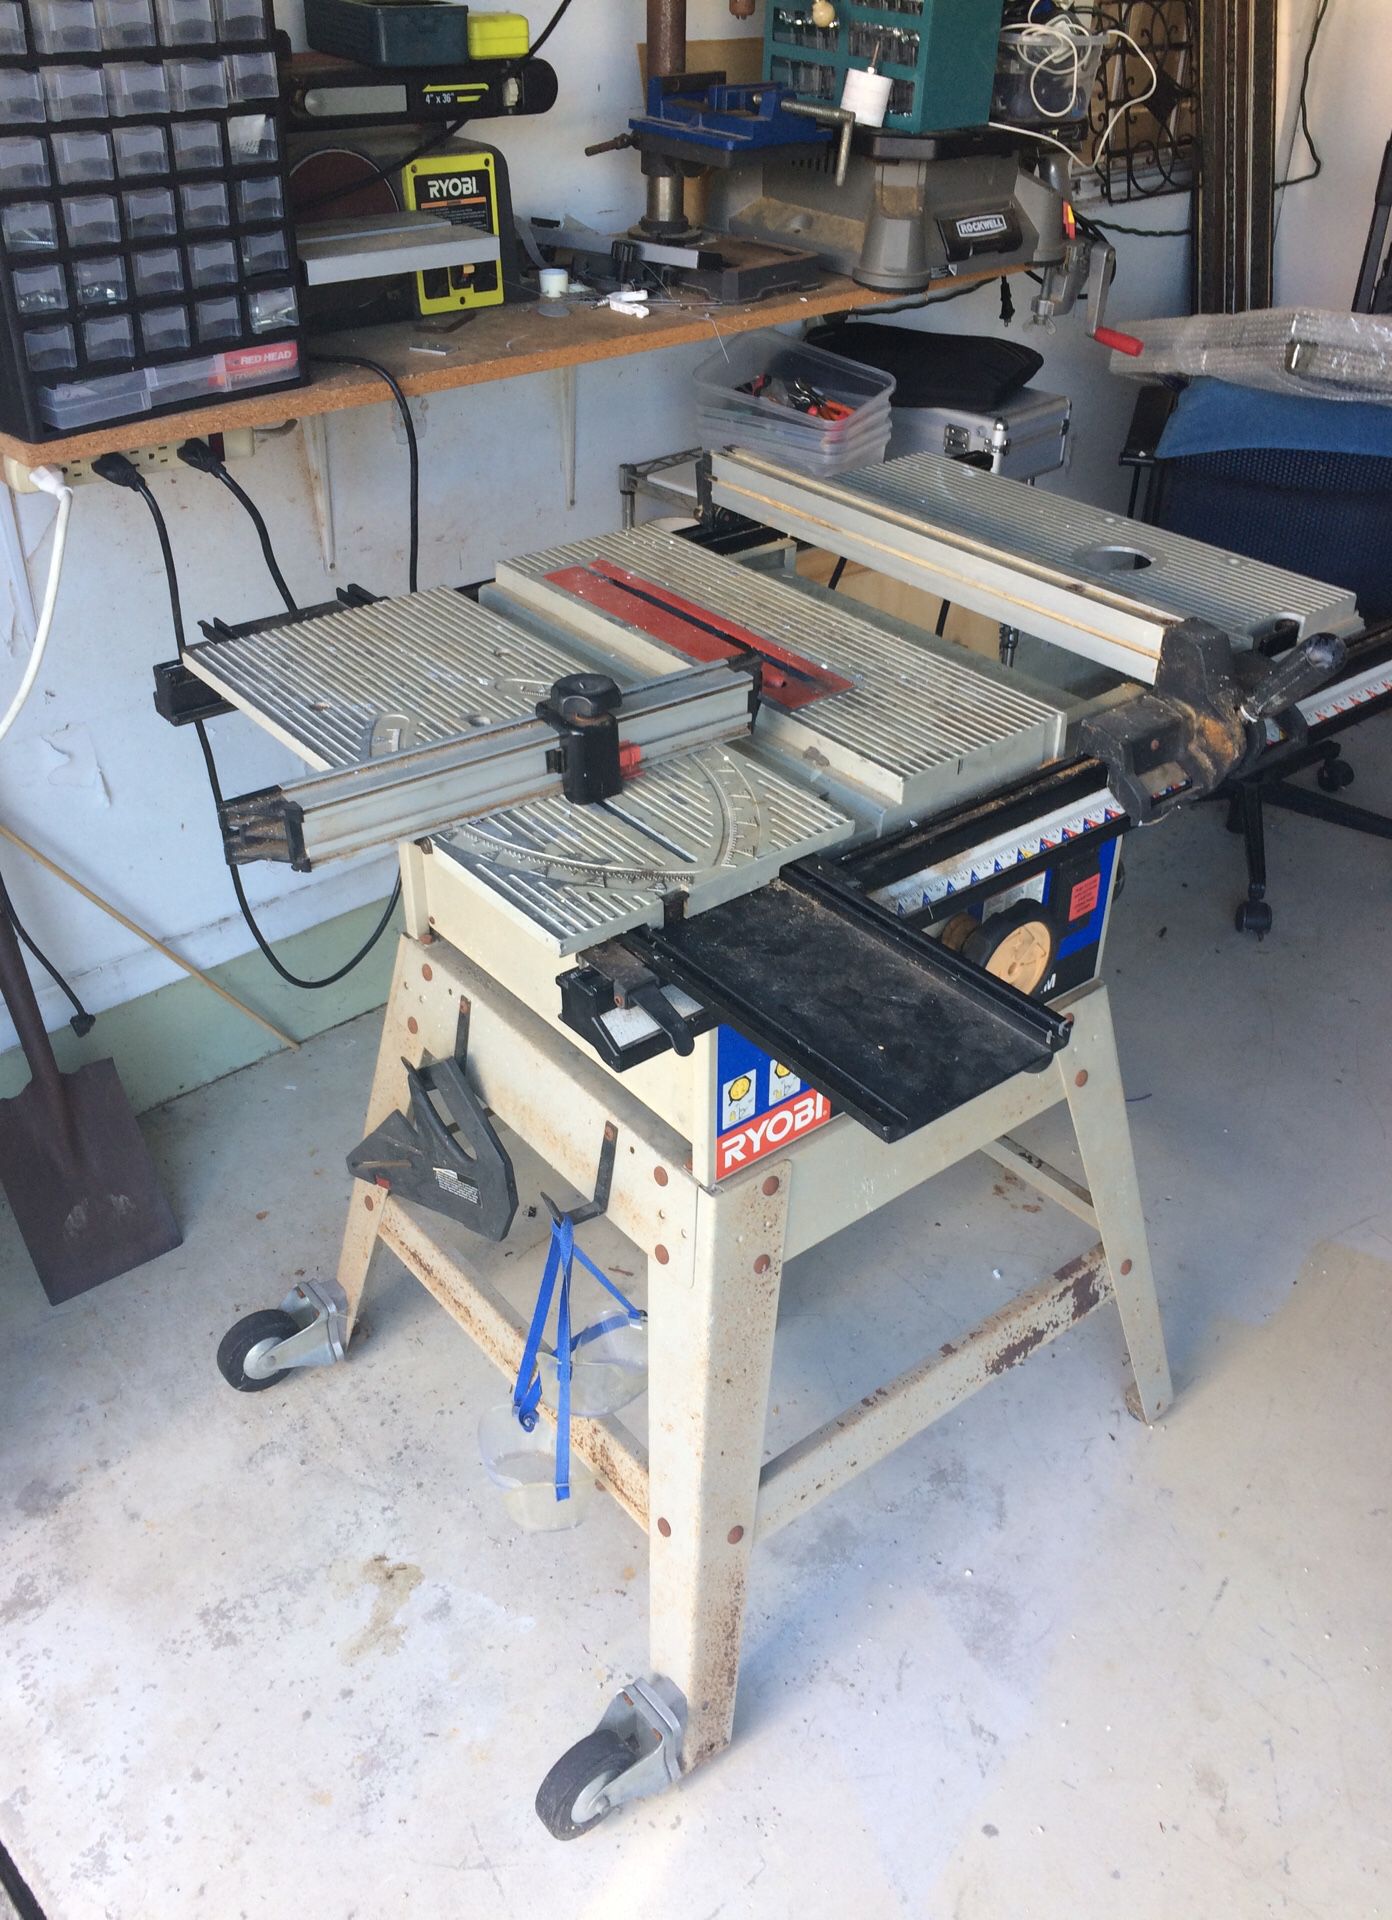 Ryobi 10 “ Table Saw. BT3100. With solid metal stand and wheels. This is the all metal model. Not plastic like the newer ones. Good, solid saw with r